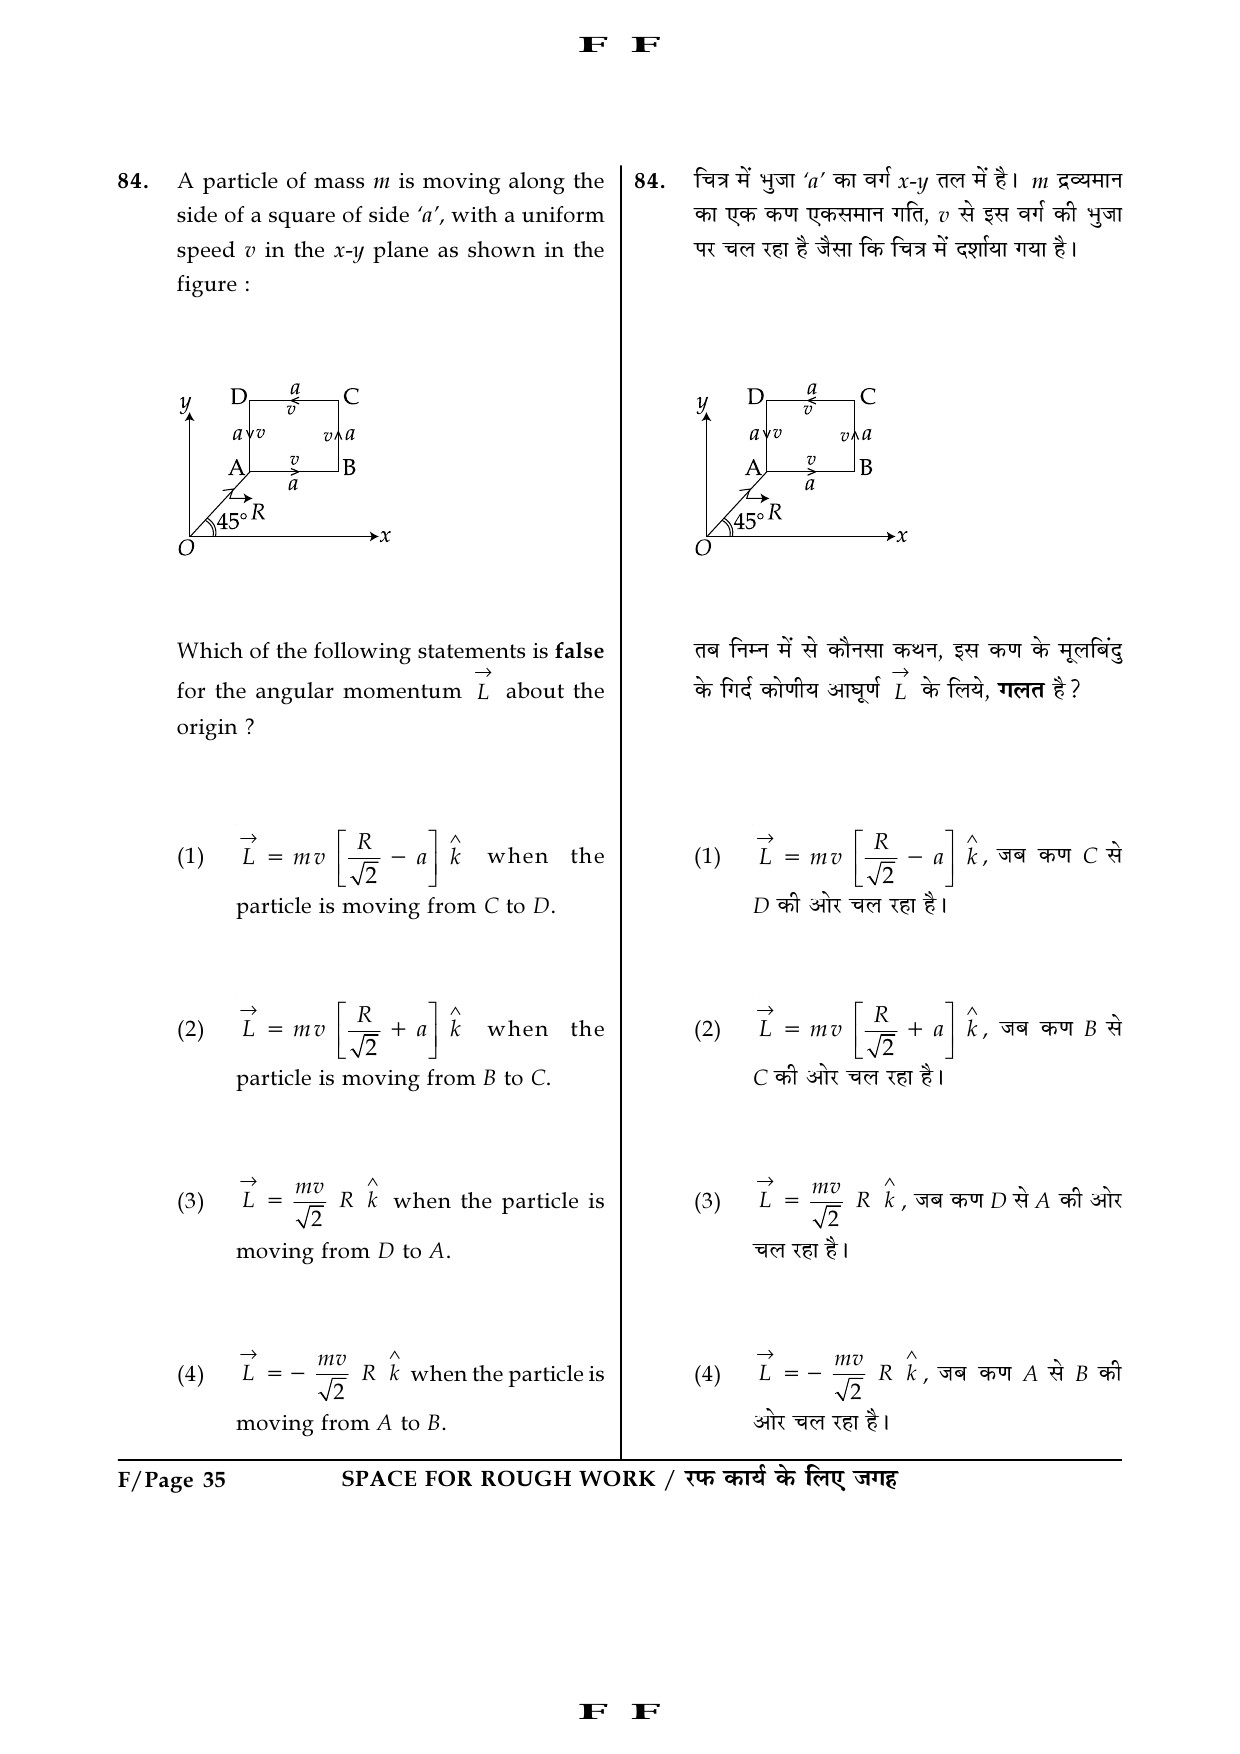 JEE Main Exam Question Paper 2016 Booklet F 35